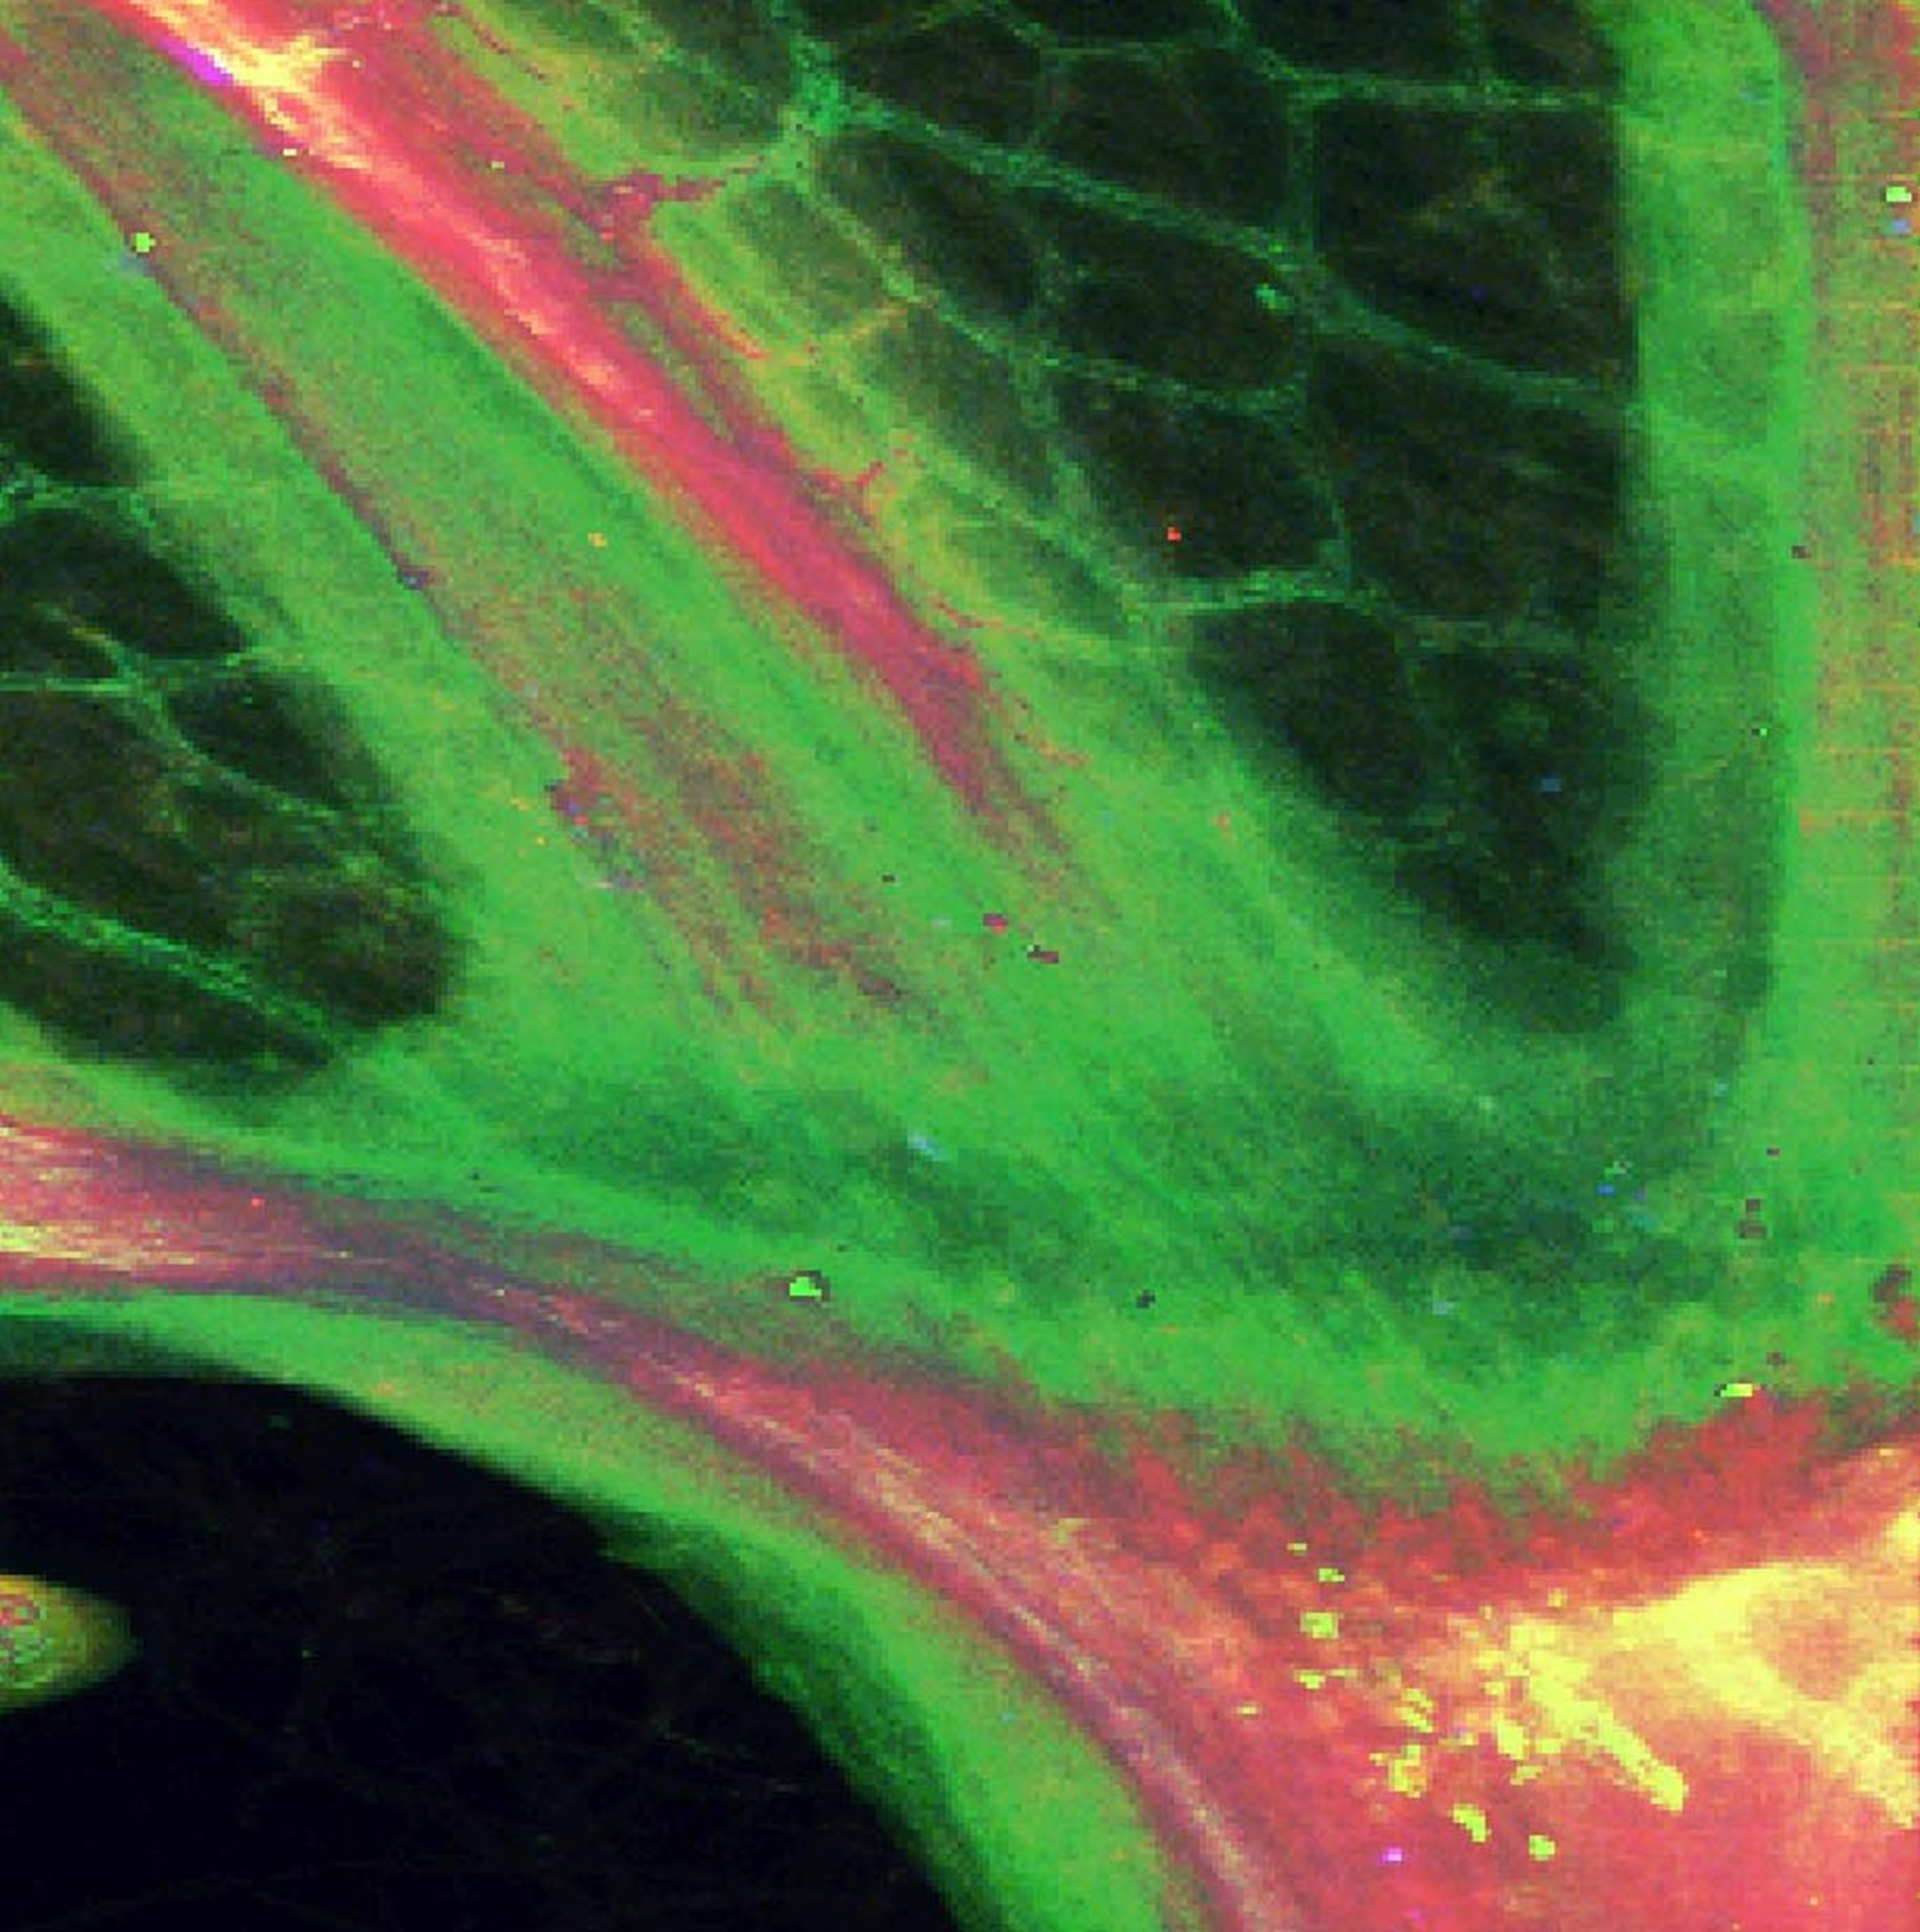 Image 3) False colour image of copper (red) and zinc (green) distribution within a modern leaf (A. pseudoplatanus). The distribution of these metals defines the vascular system. Image width ~3 mm. Image from data acquired at the Diamond Light Source, the UK’s national synchrotron science facility.  